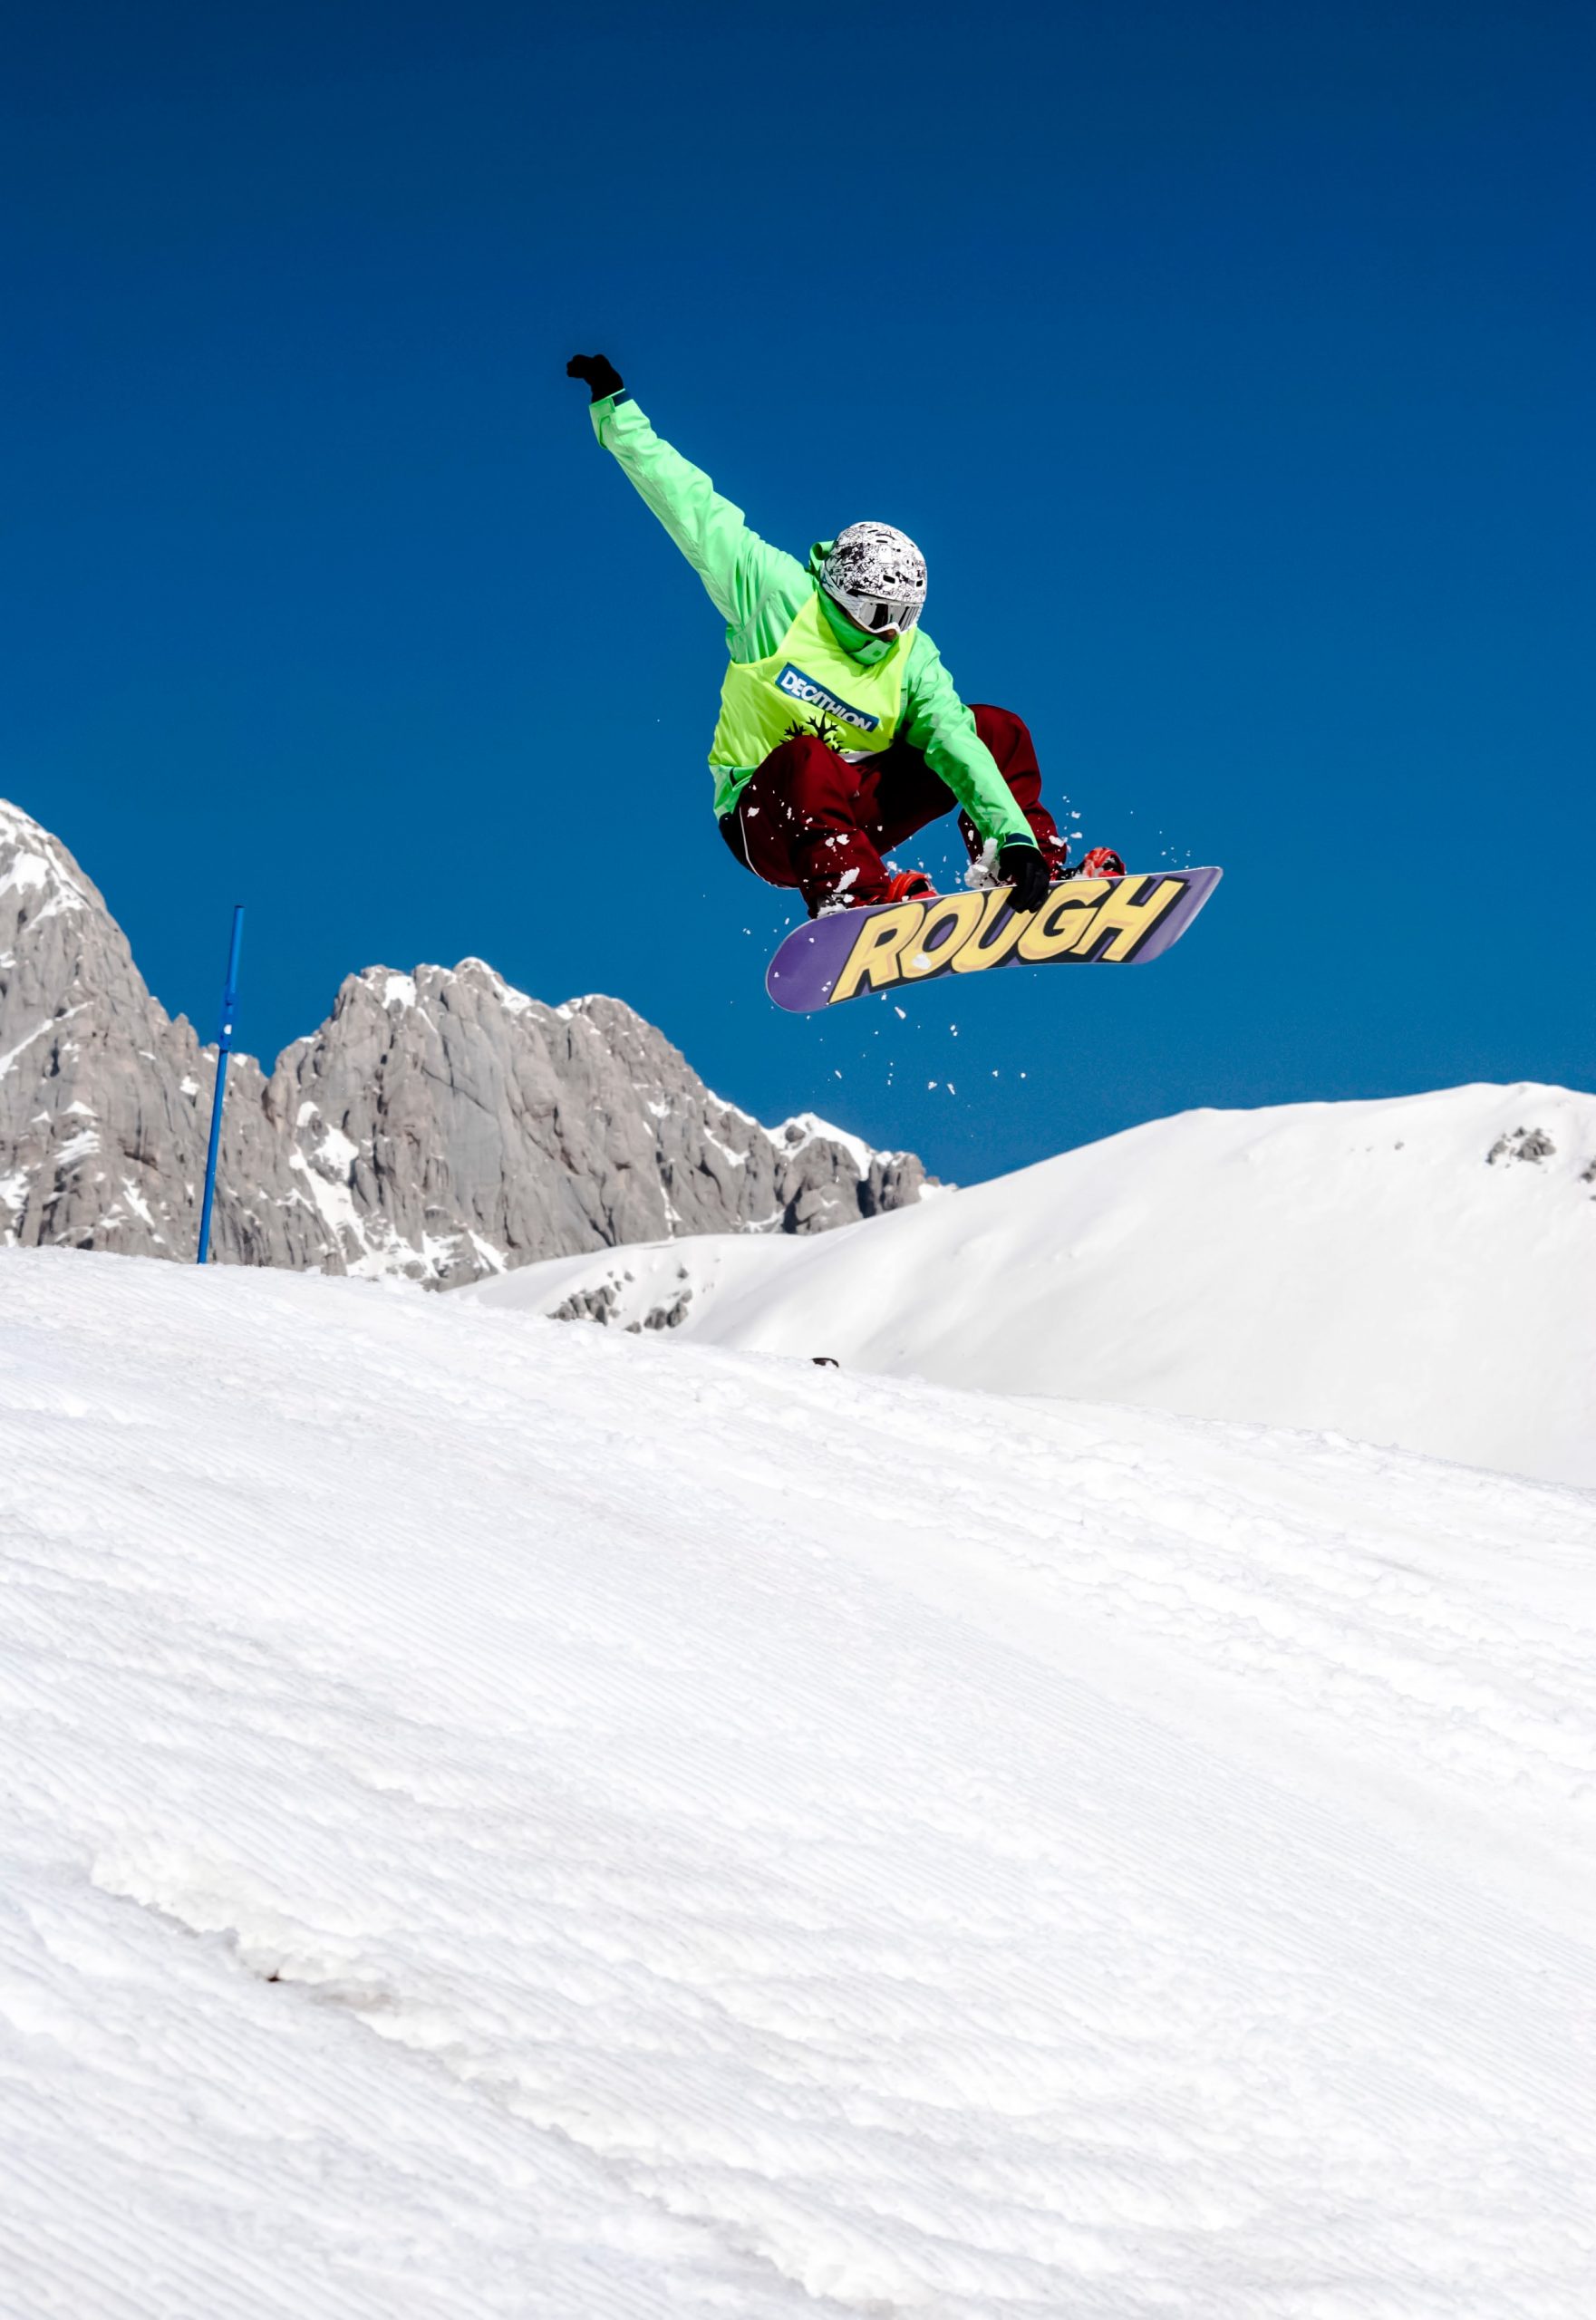 The Best Snowboarding Tips to Improve Your Riding